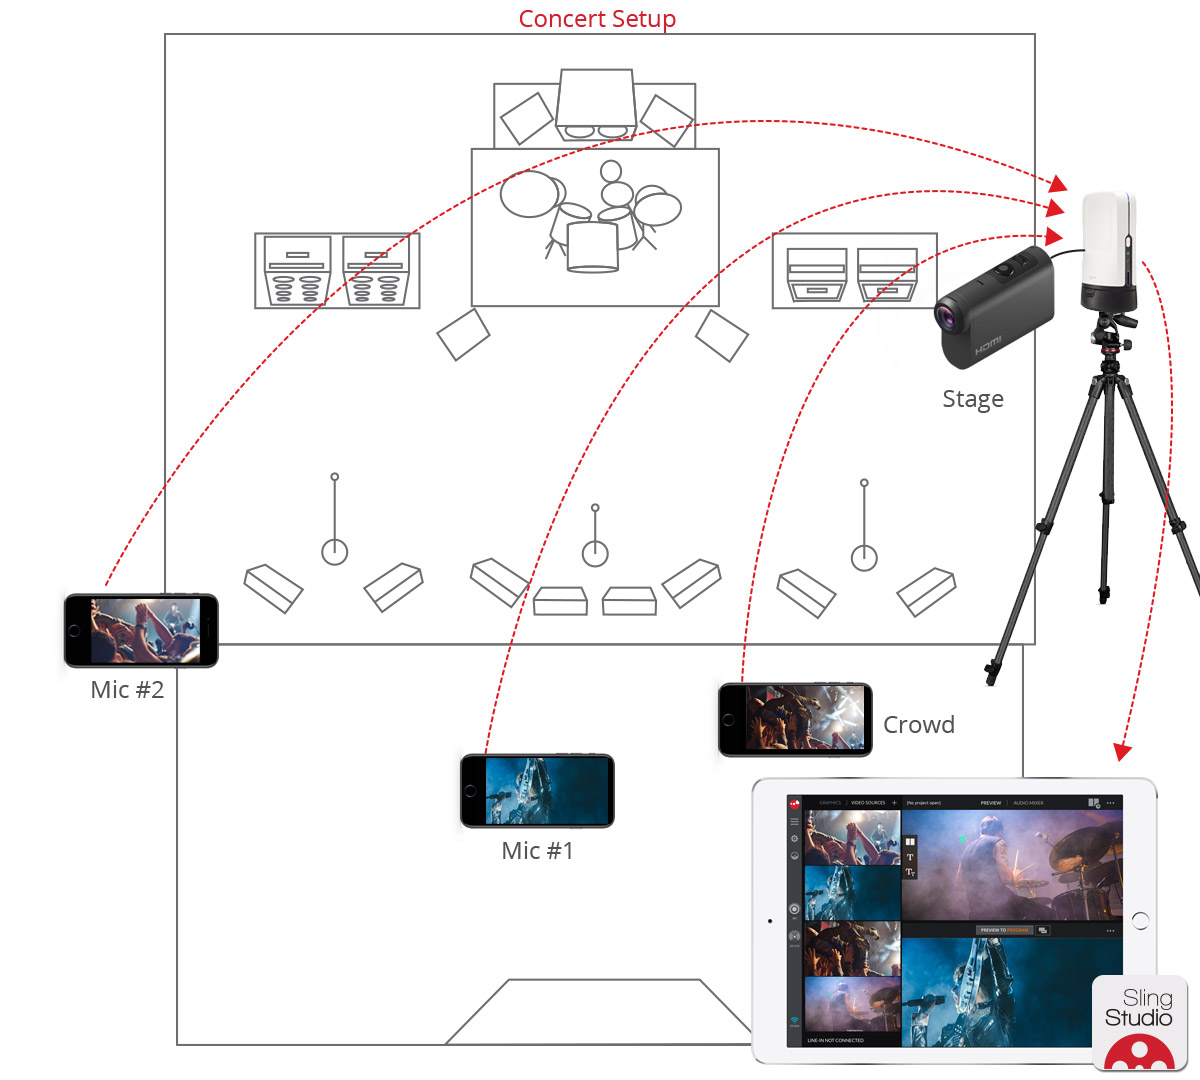 Diagram on how to live stream events using SlingStudio video switcher